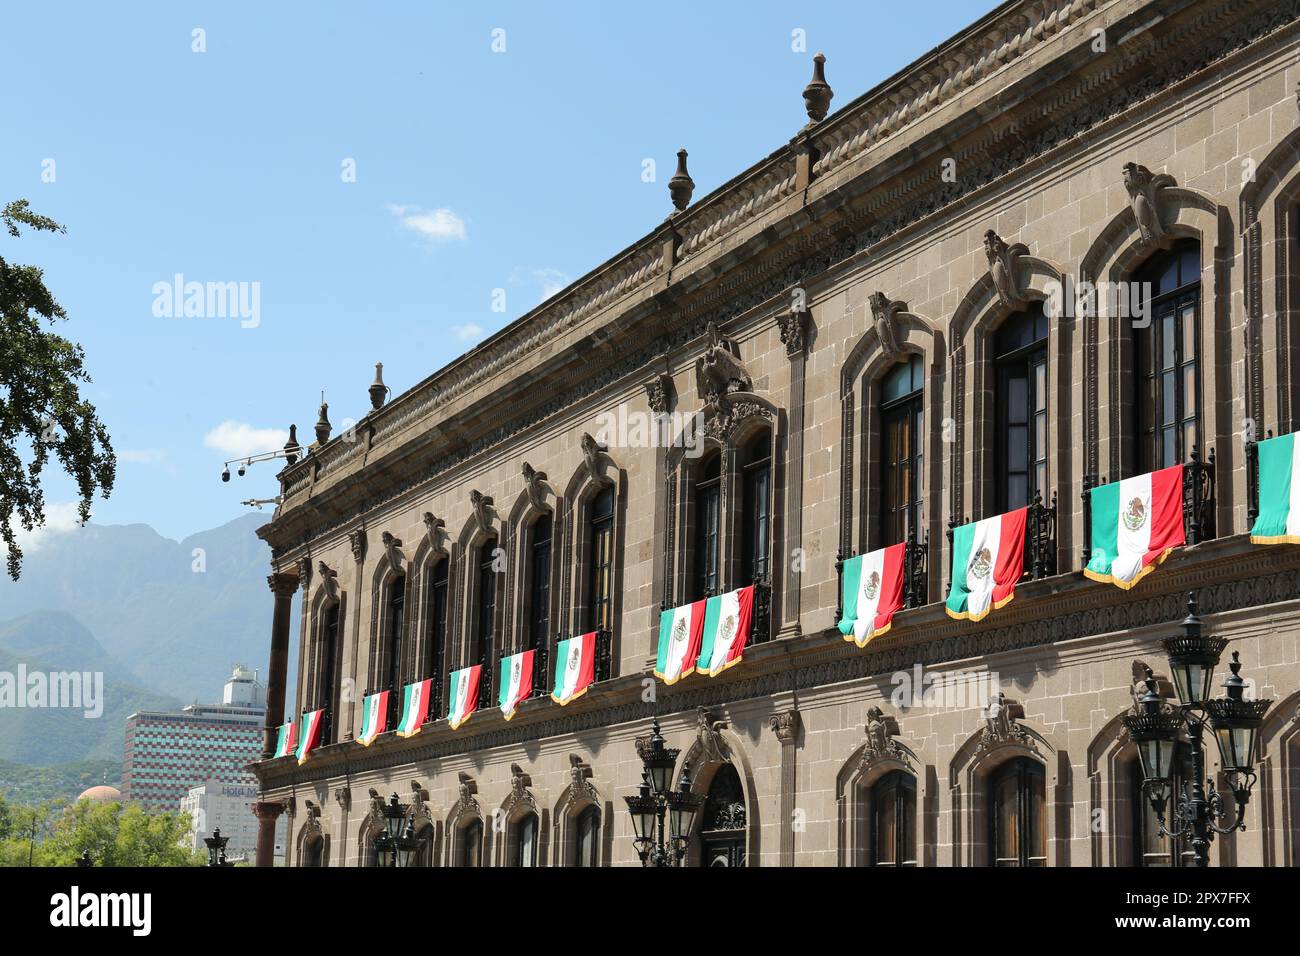 MONTERREY (NUEVO LEON), MEXICO - SEPTEMBER 29, 2022: Beautiful view of Palacio de Gobierno (Government Palace) with flags on sunny day Stock Photo